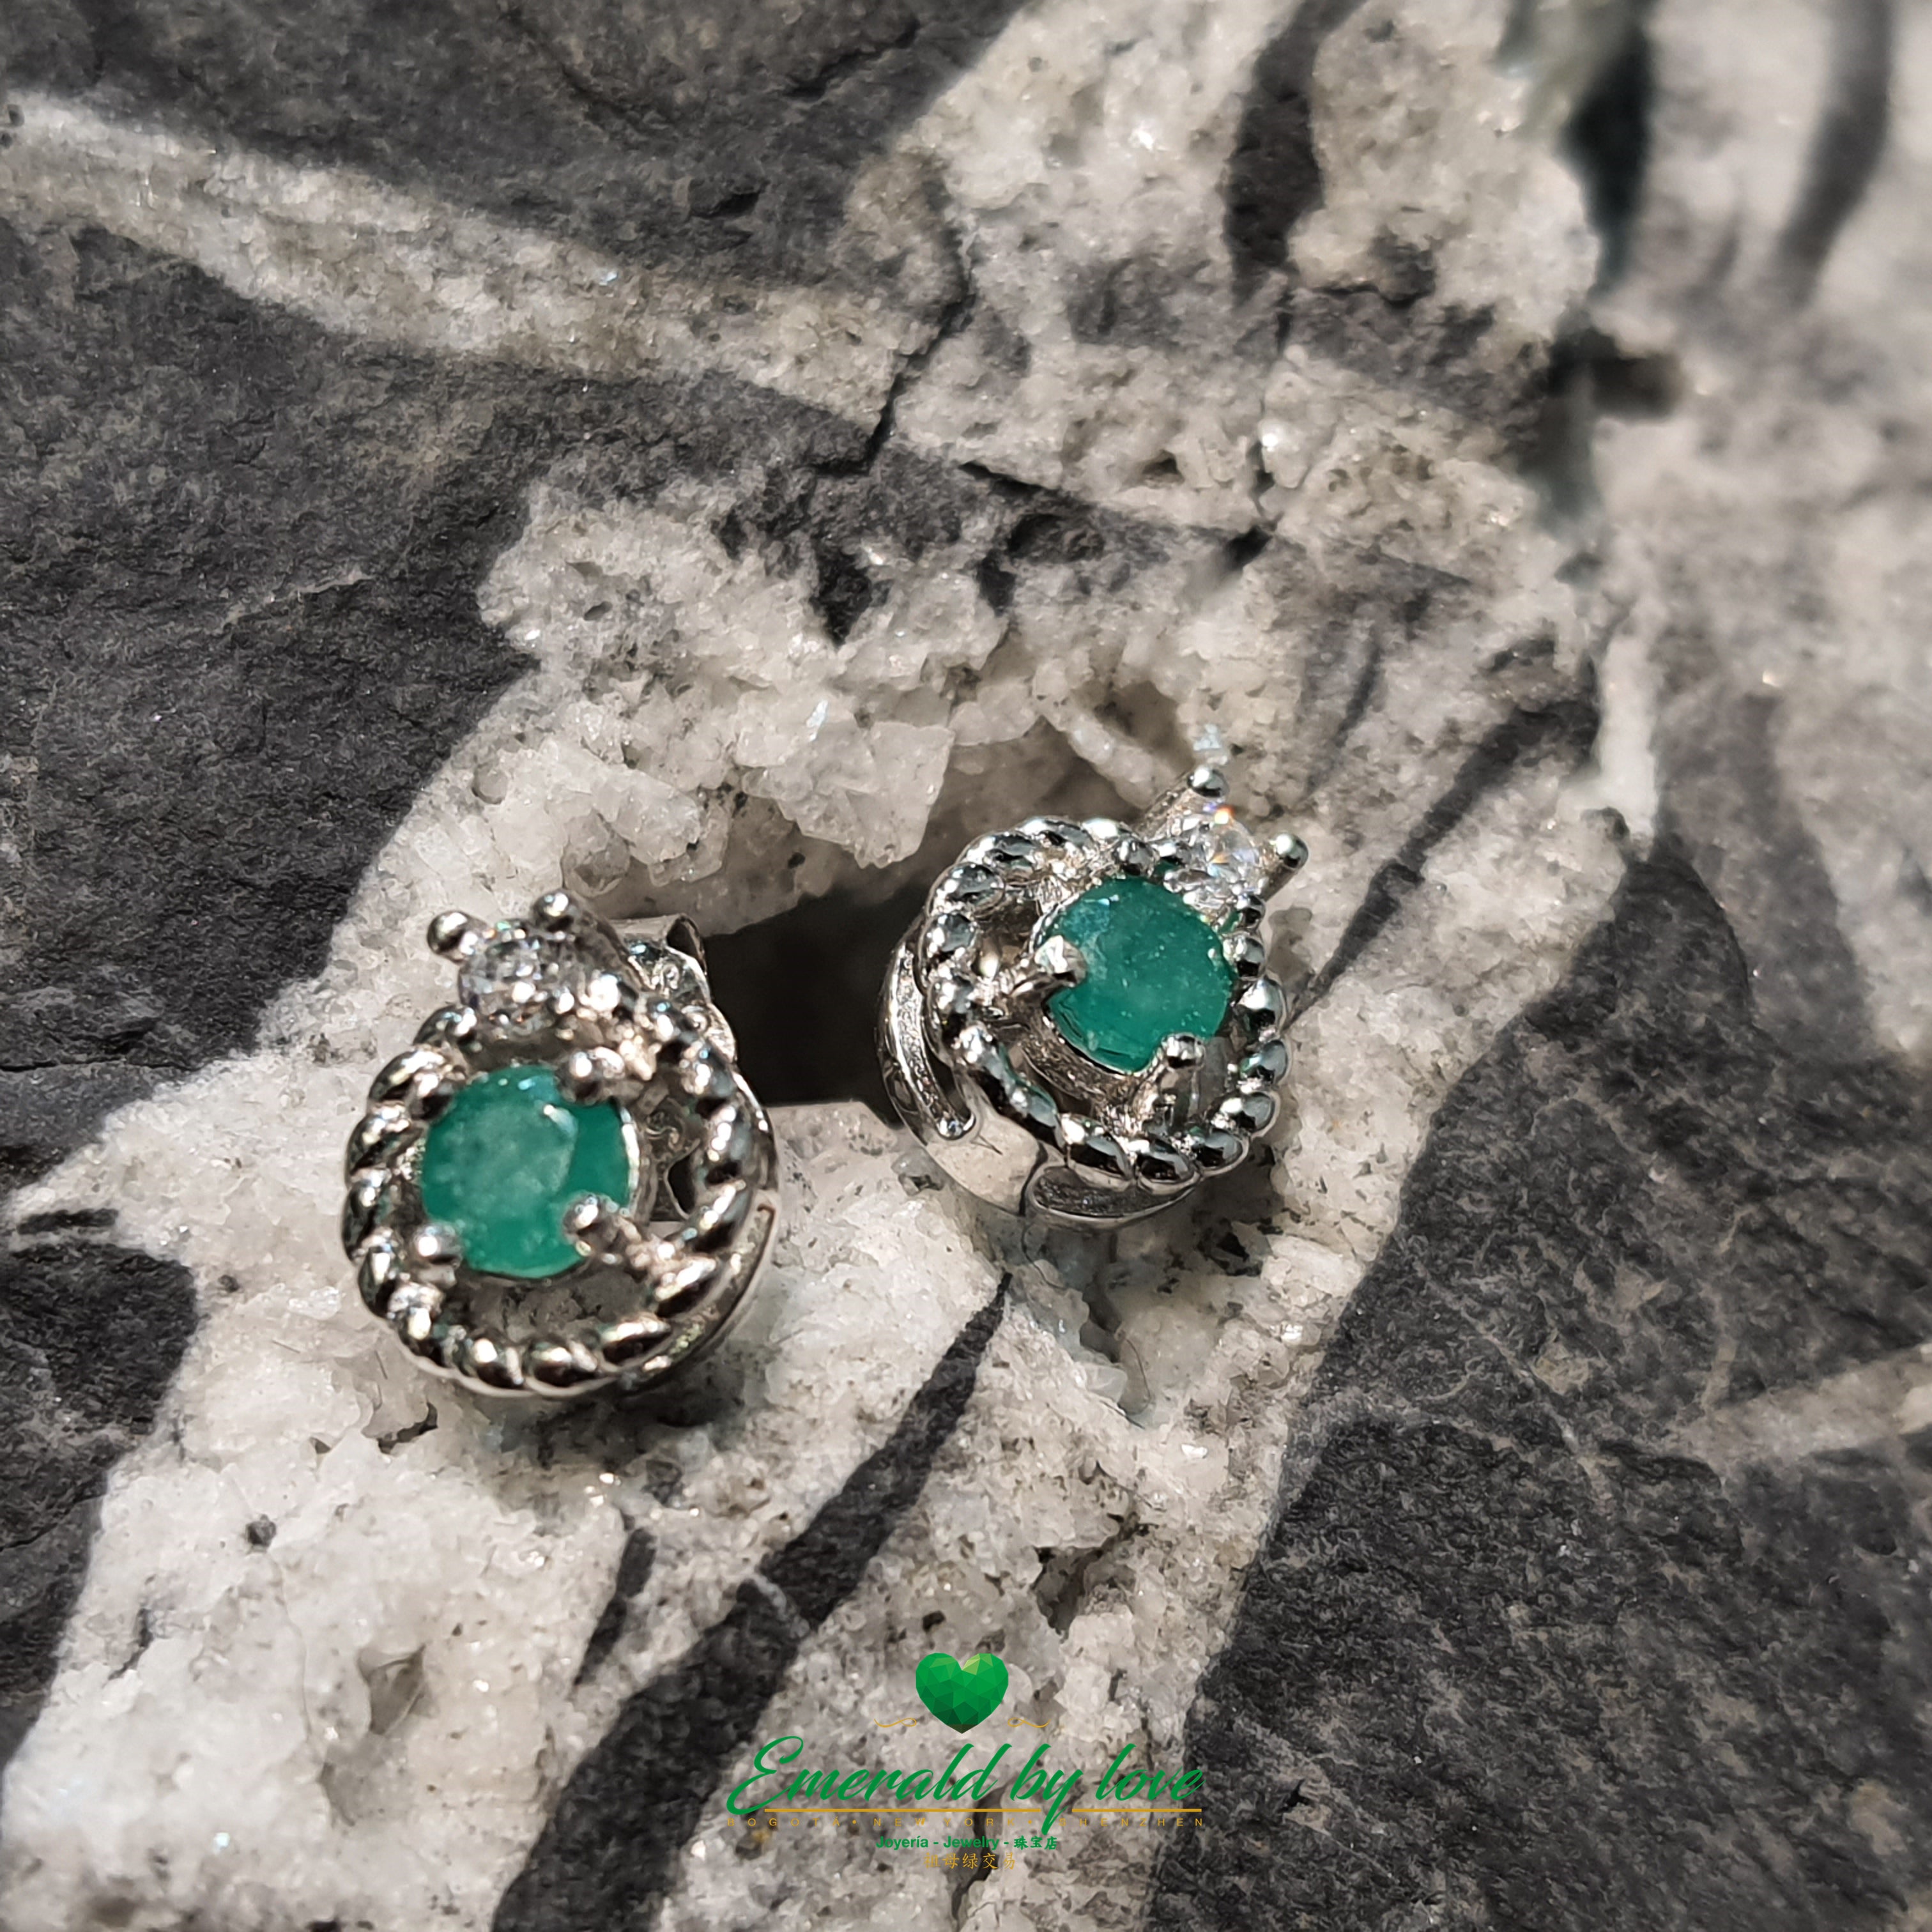 Delicate Sterling Silver Stud Earrings with Petite Round Central Colombian Emerald